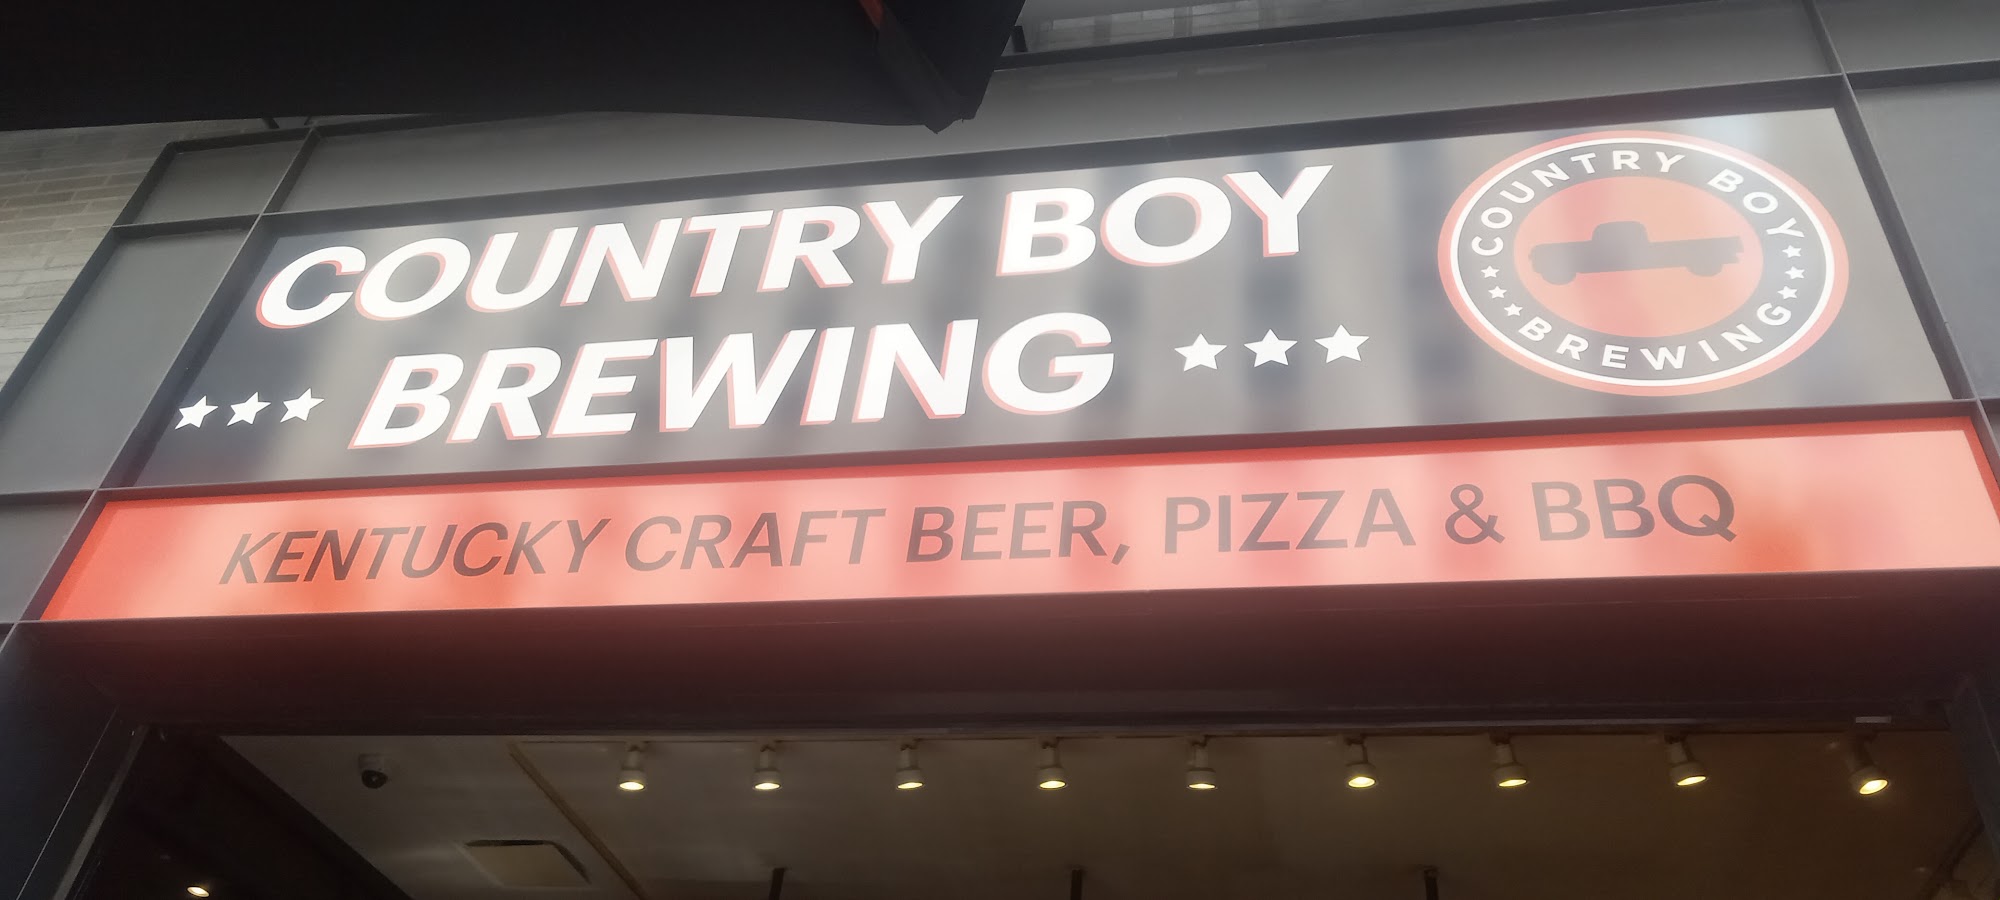 Country Boy Brewing Louisville - Omni Taproom